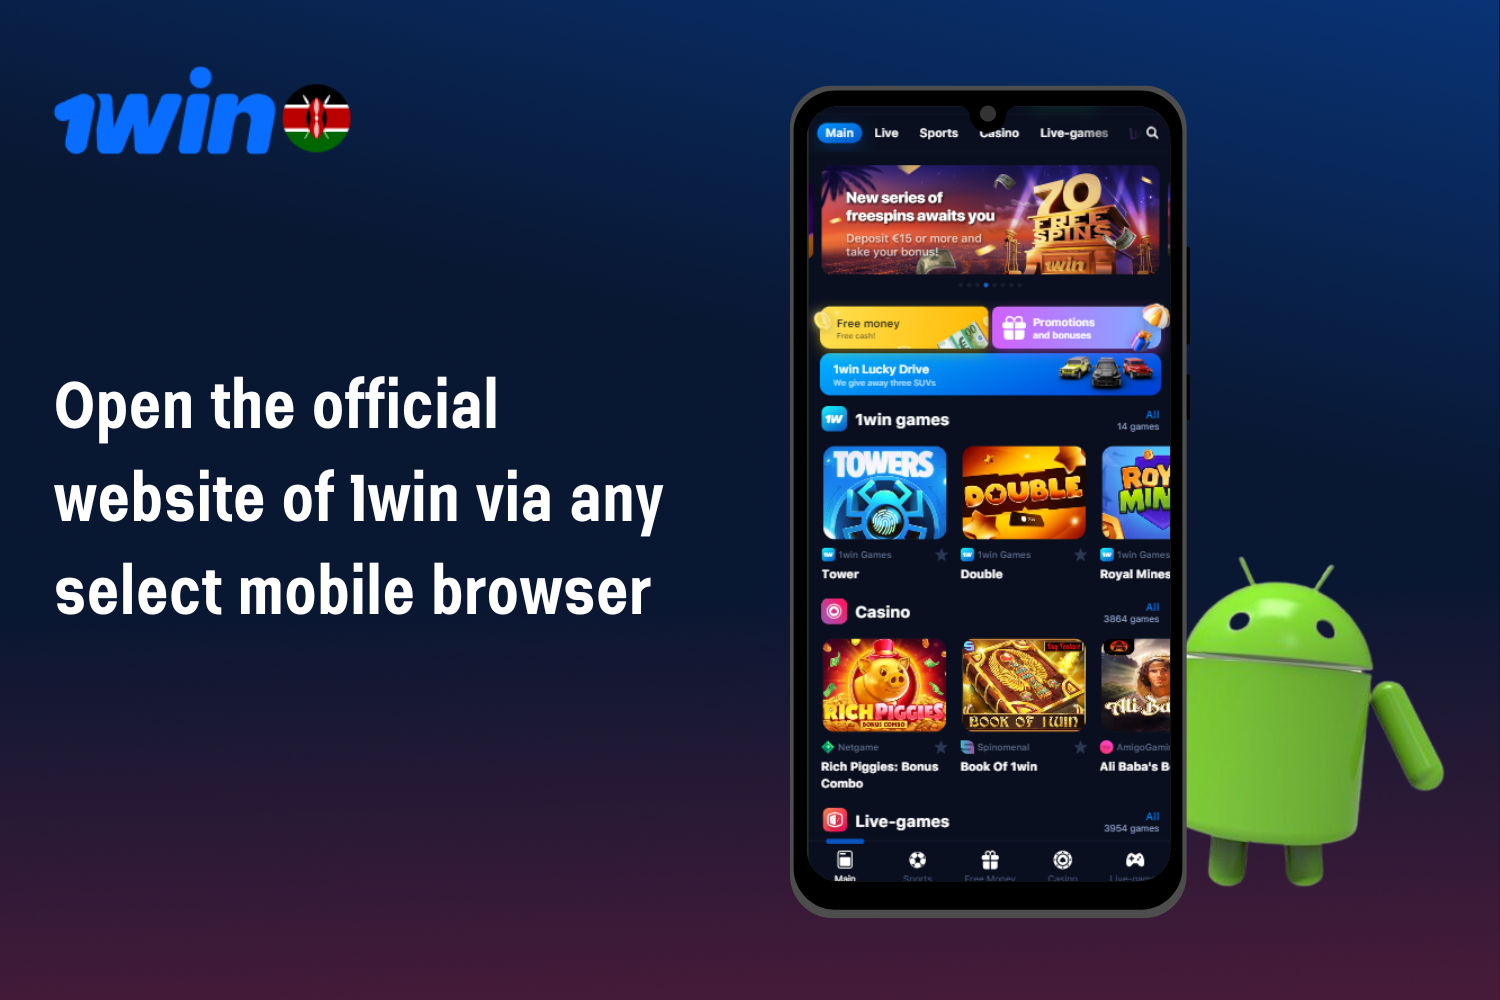 To download the application, users from Kenya need to open the official website of 1win from a mobile browser